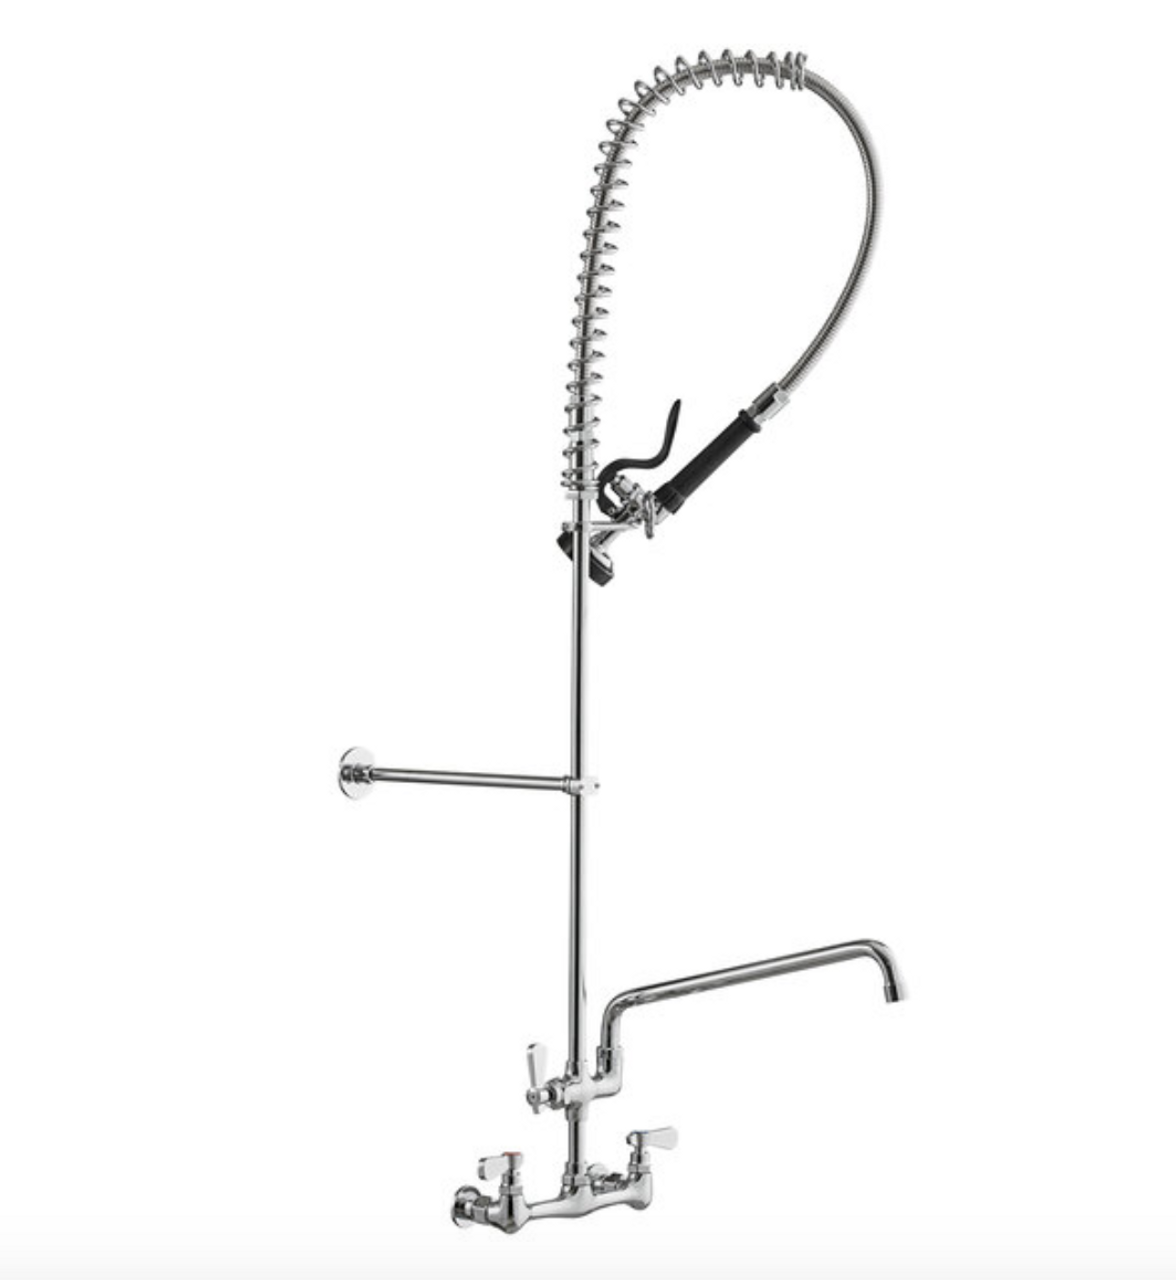 buy | shop | like BK Resources BKF-VSMPR-WB-AF12-G Workforce 8” Splash Mount Pre-Rinse with Add-A-Faucet  like T&S Stainless Steel 8" Wall Mount Mixing Faucet with Swing Nozzle and Pre-Rinse Unit with Spray Valve, B-0133